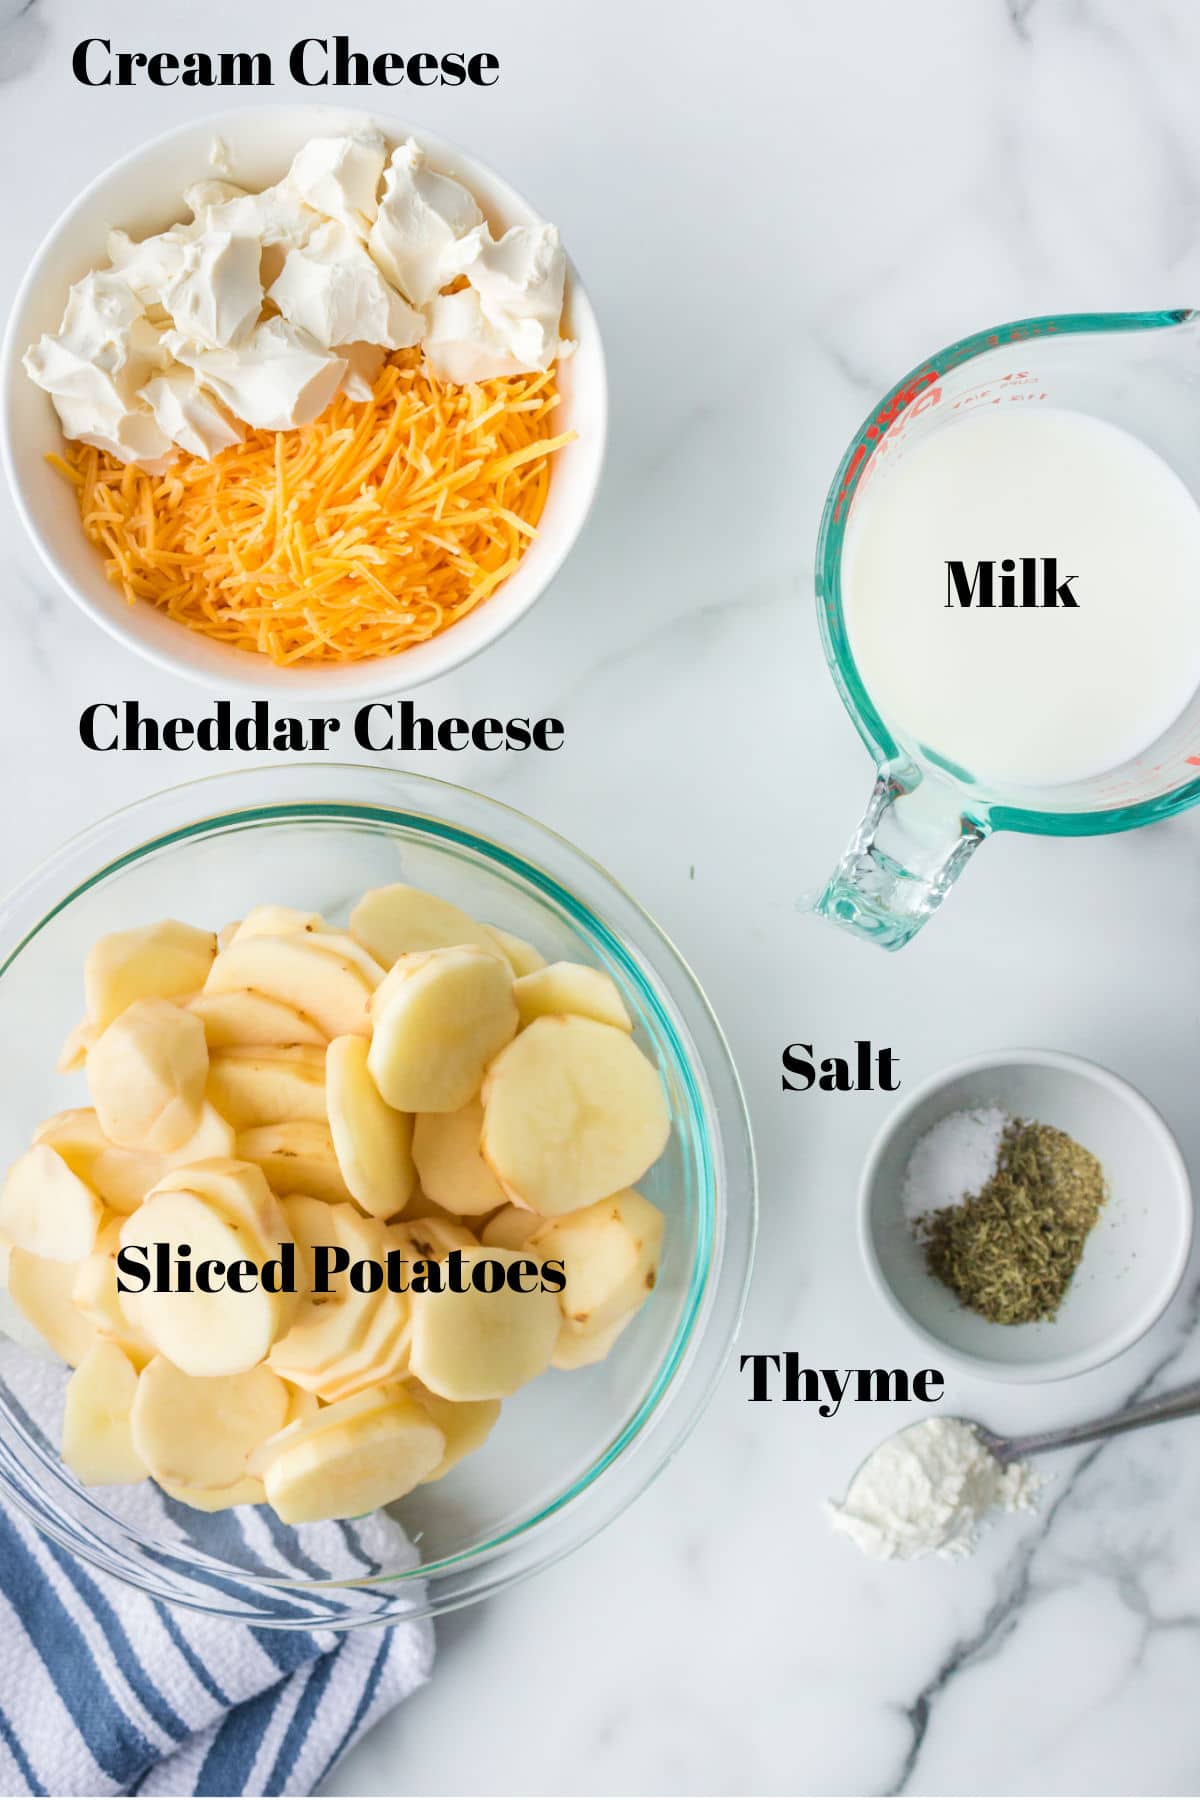 Photo of ingredients for cream cheese scalloped potatoes with labels on the items.